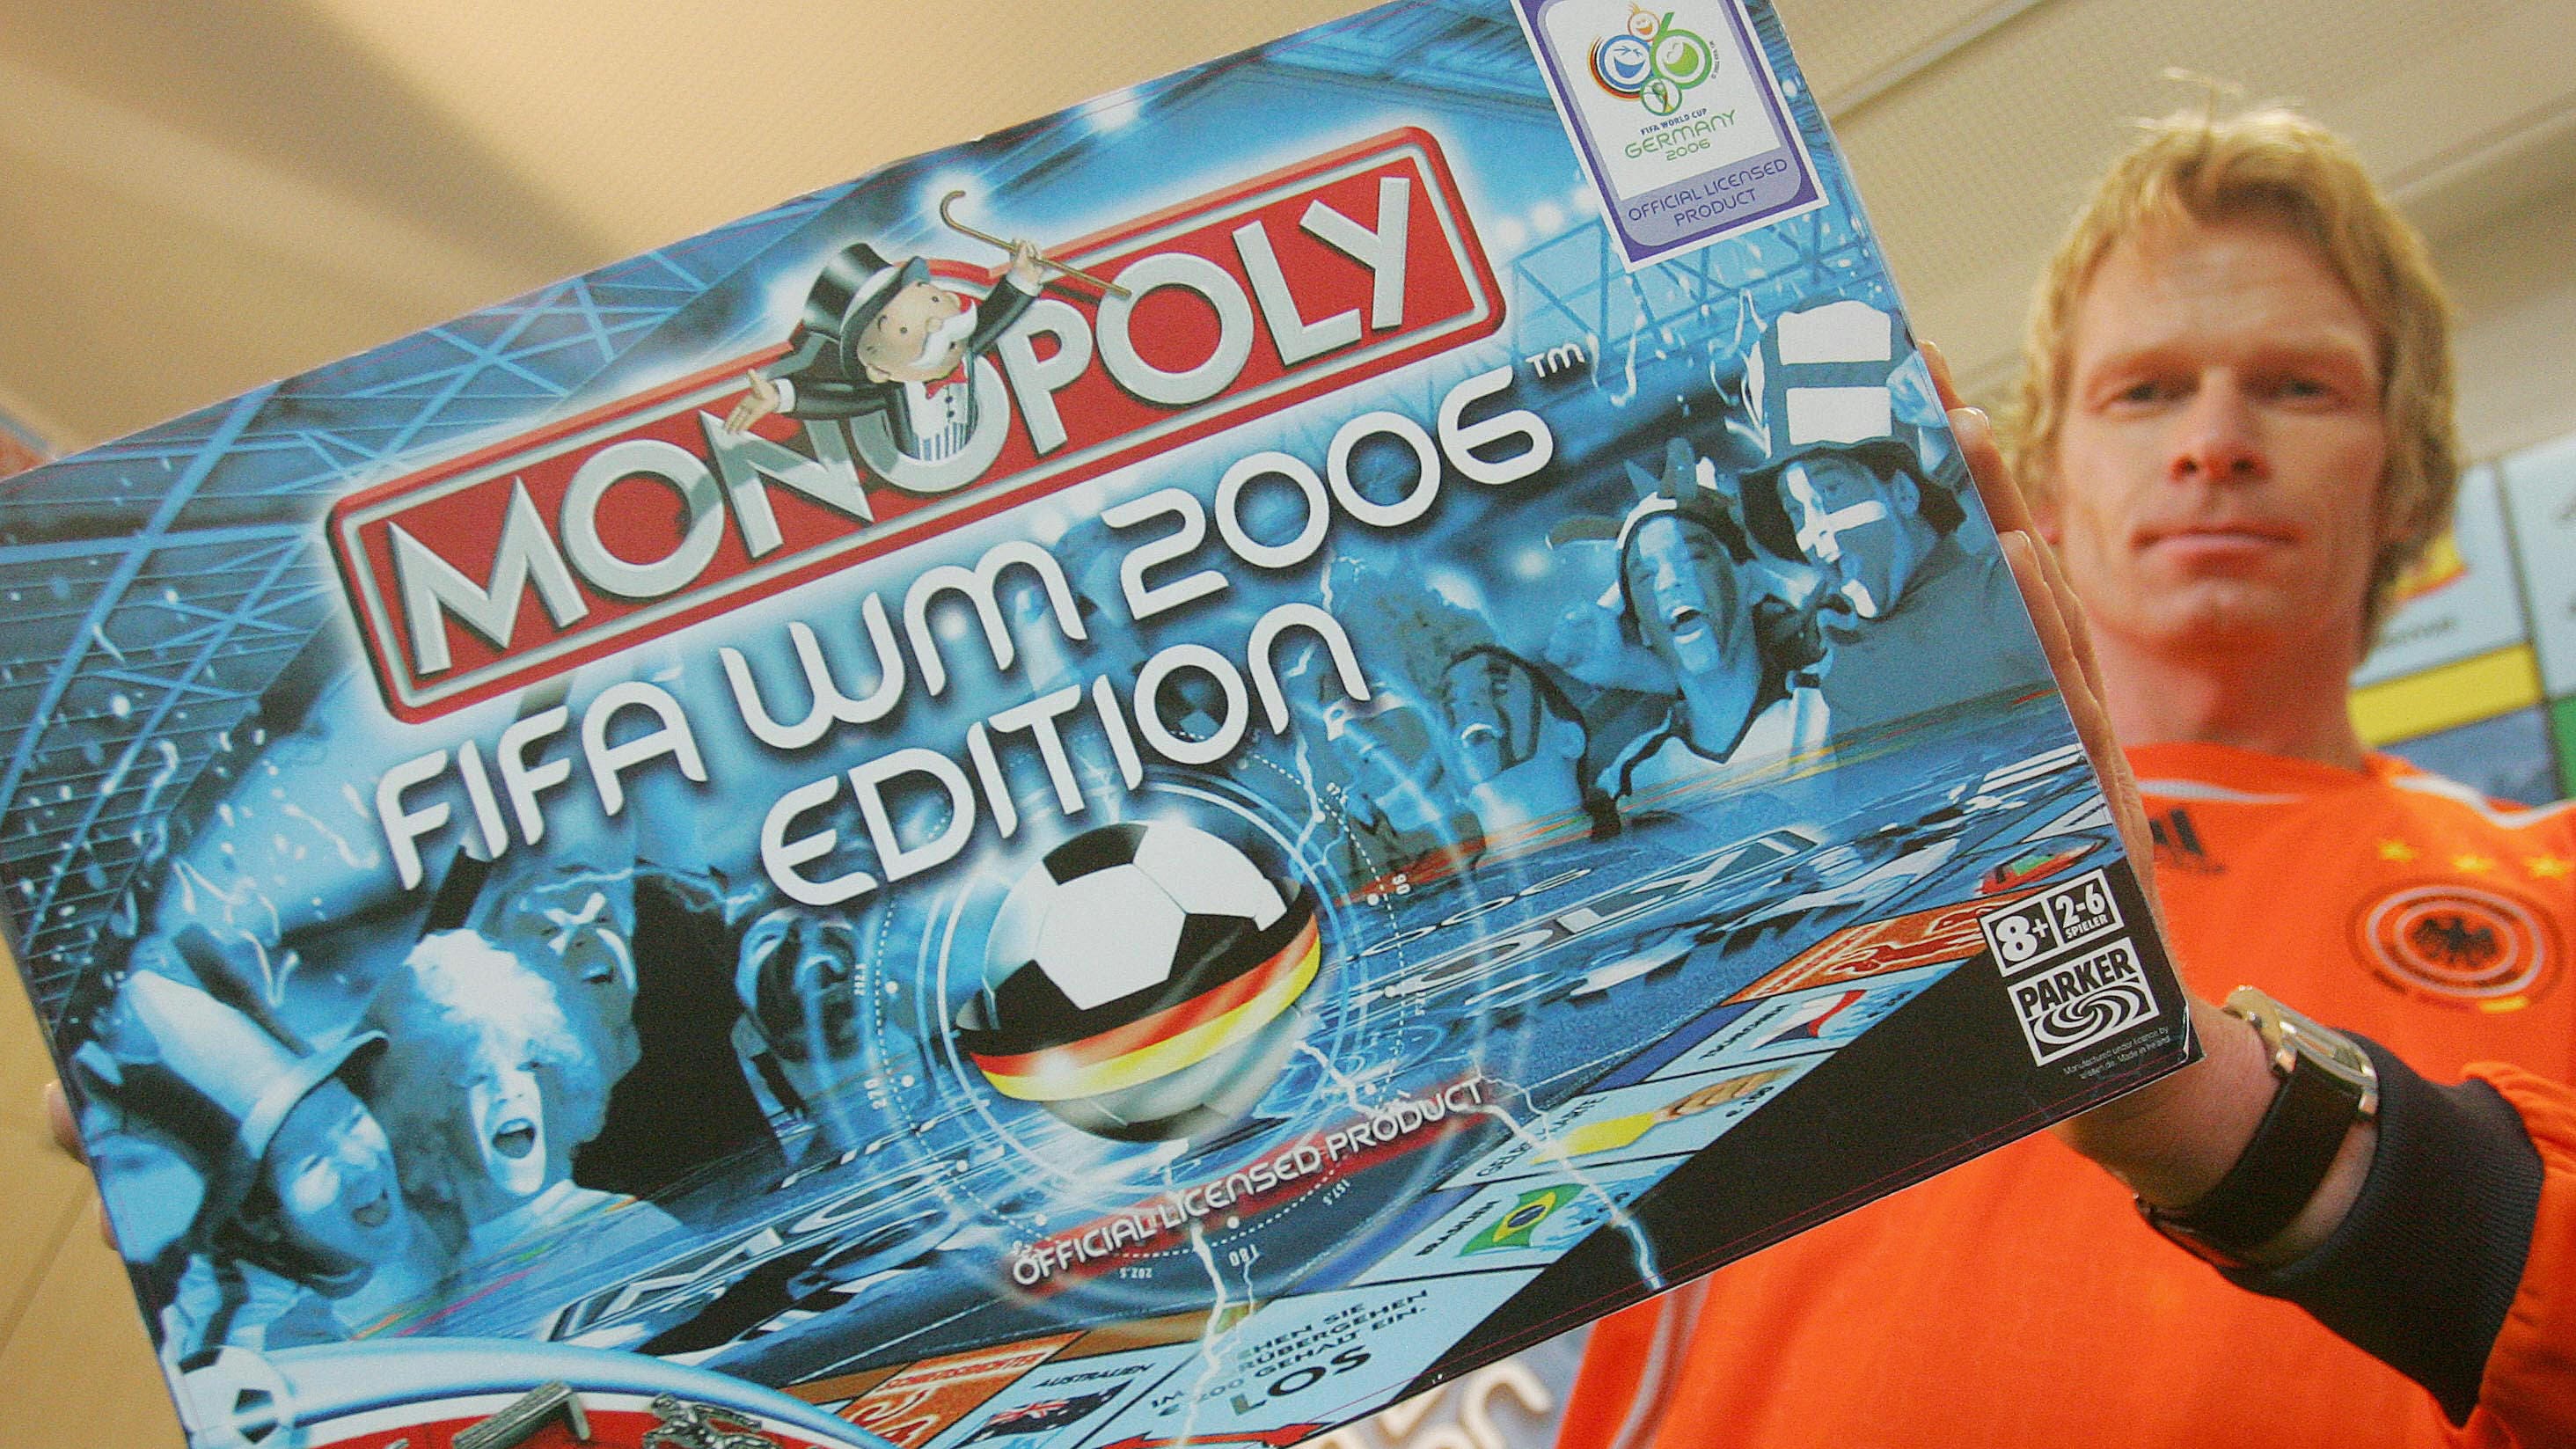 Monopoly World Cup 2006 edition